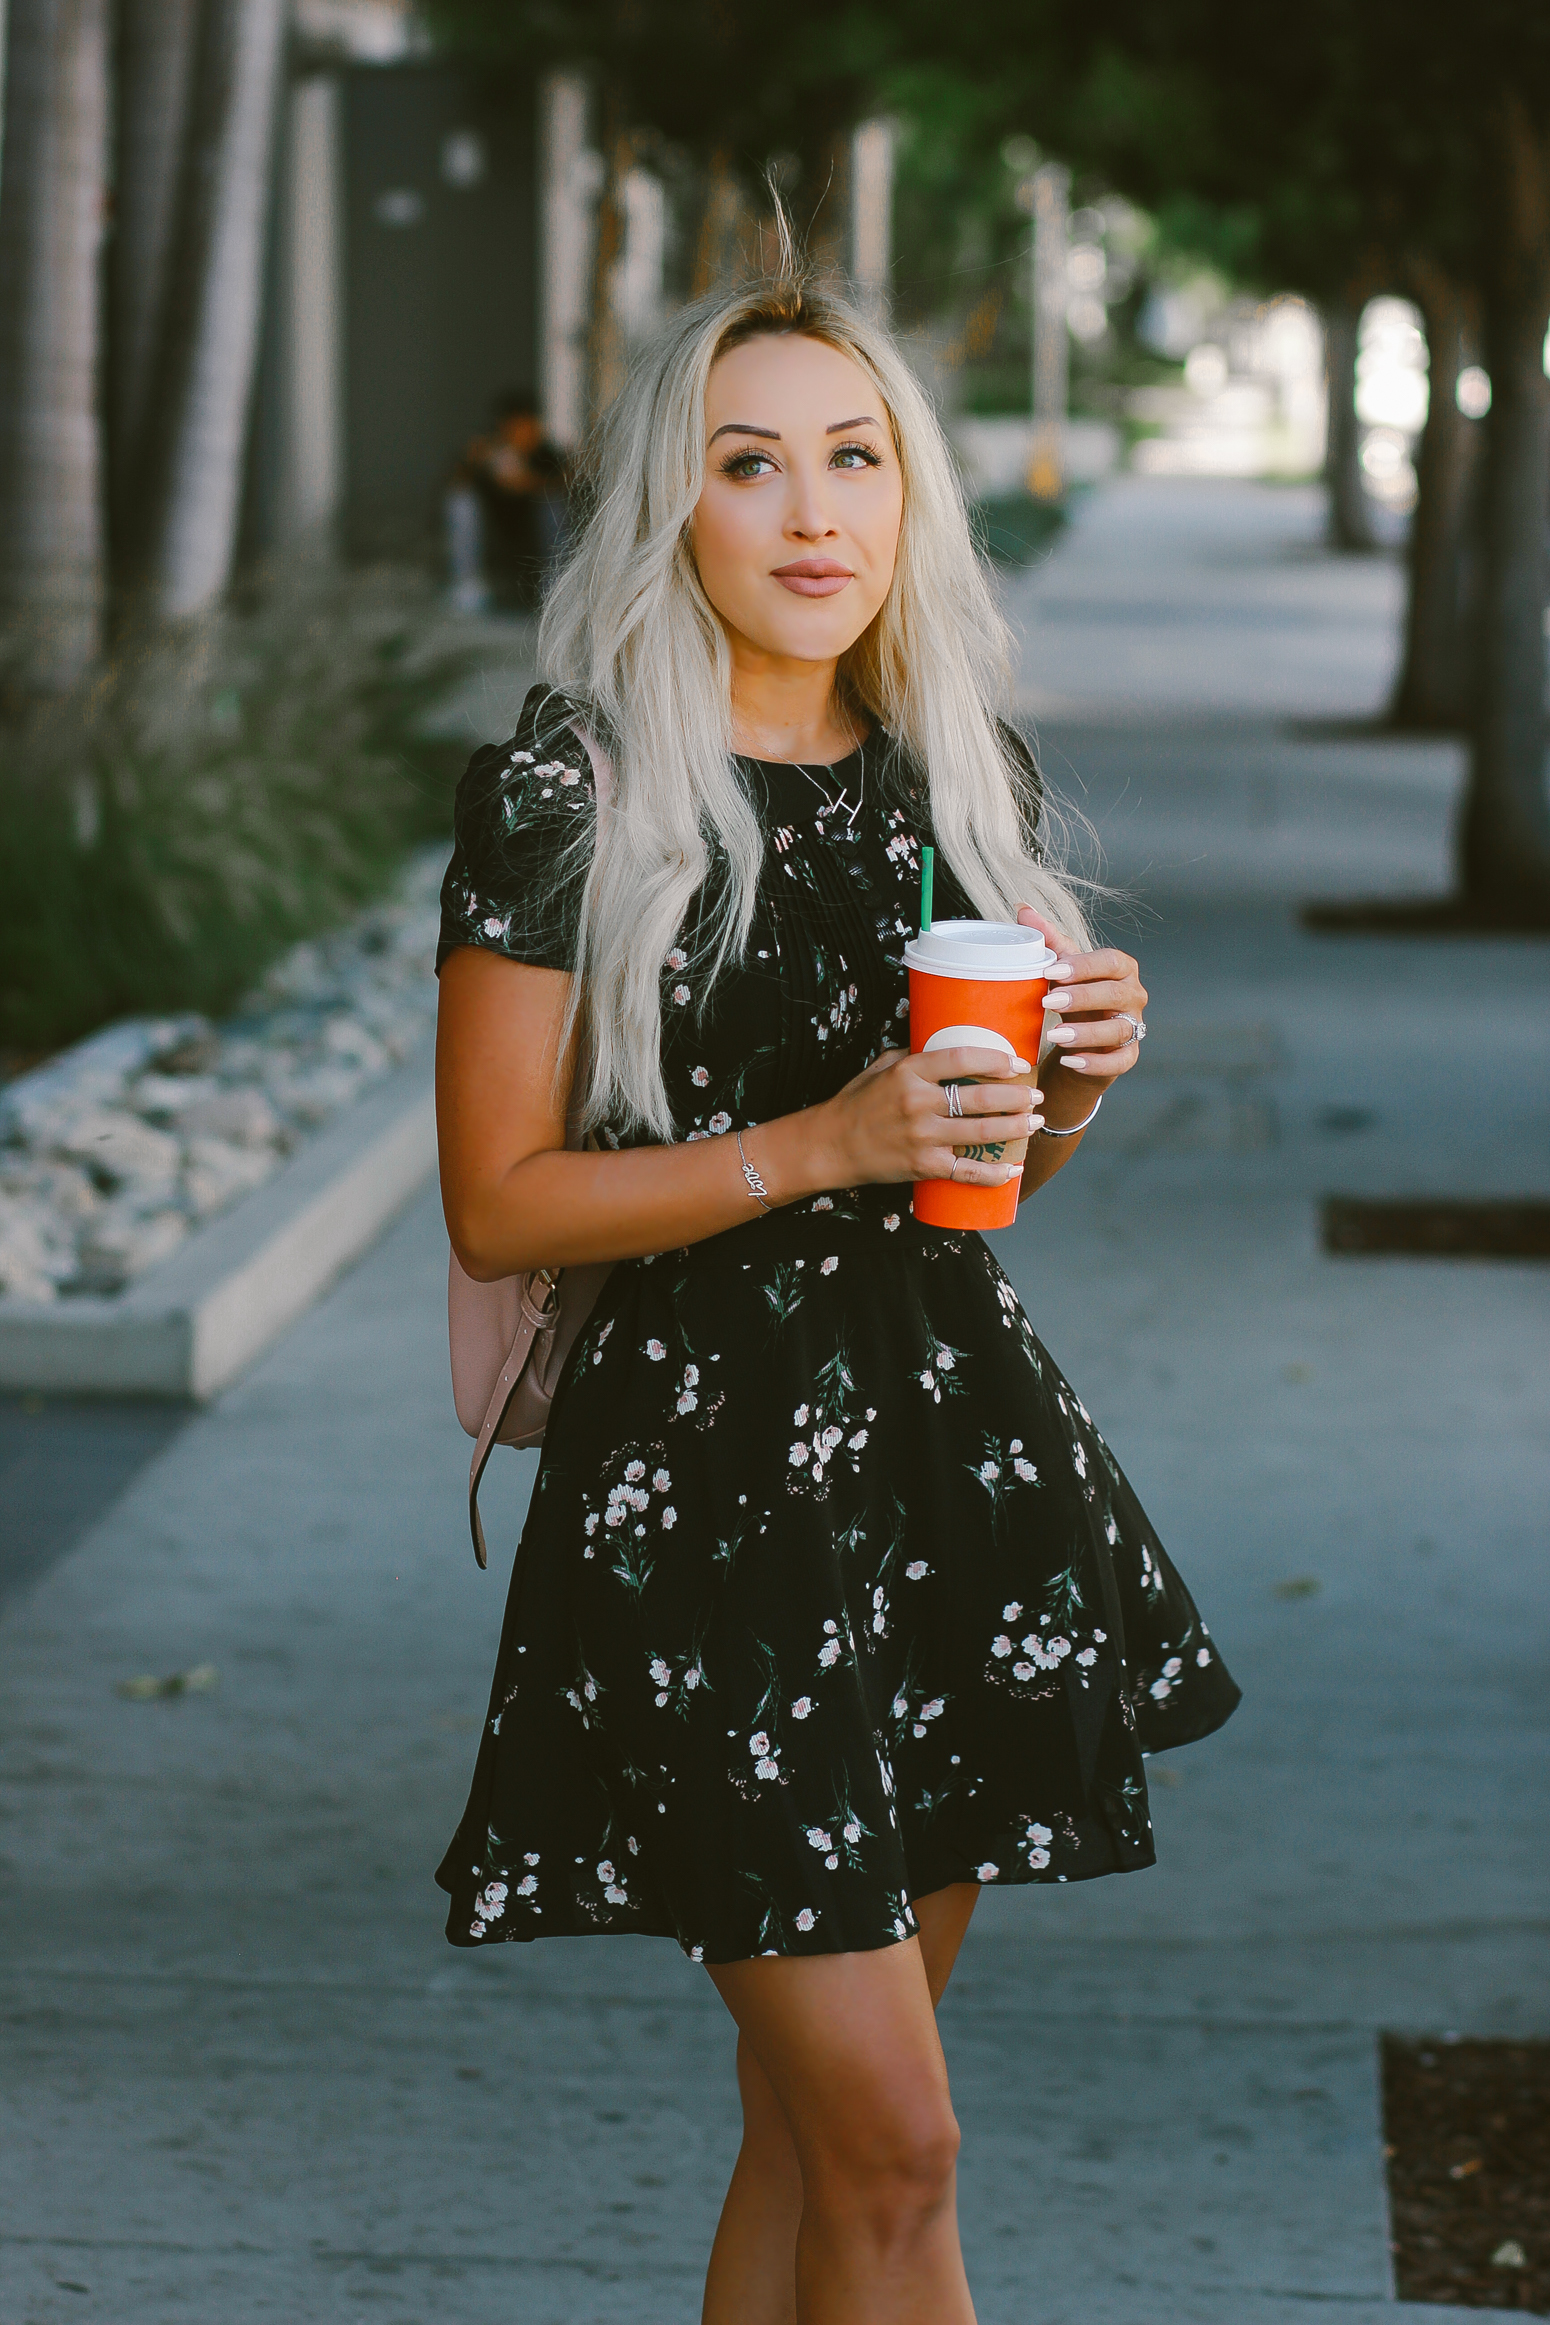 Blondie in the City | Cute Floral Fall Dress w/ Ankle Lace Heels